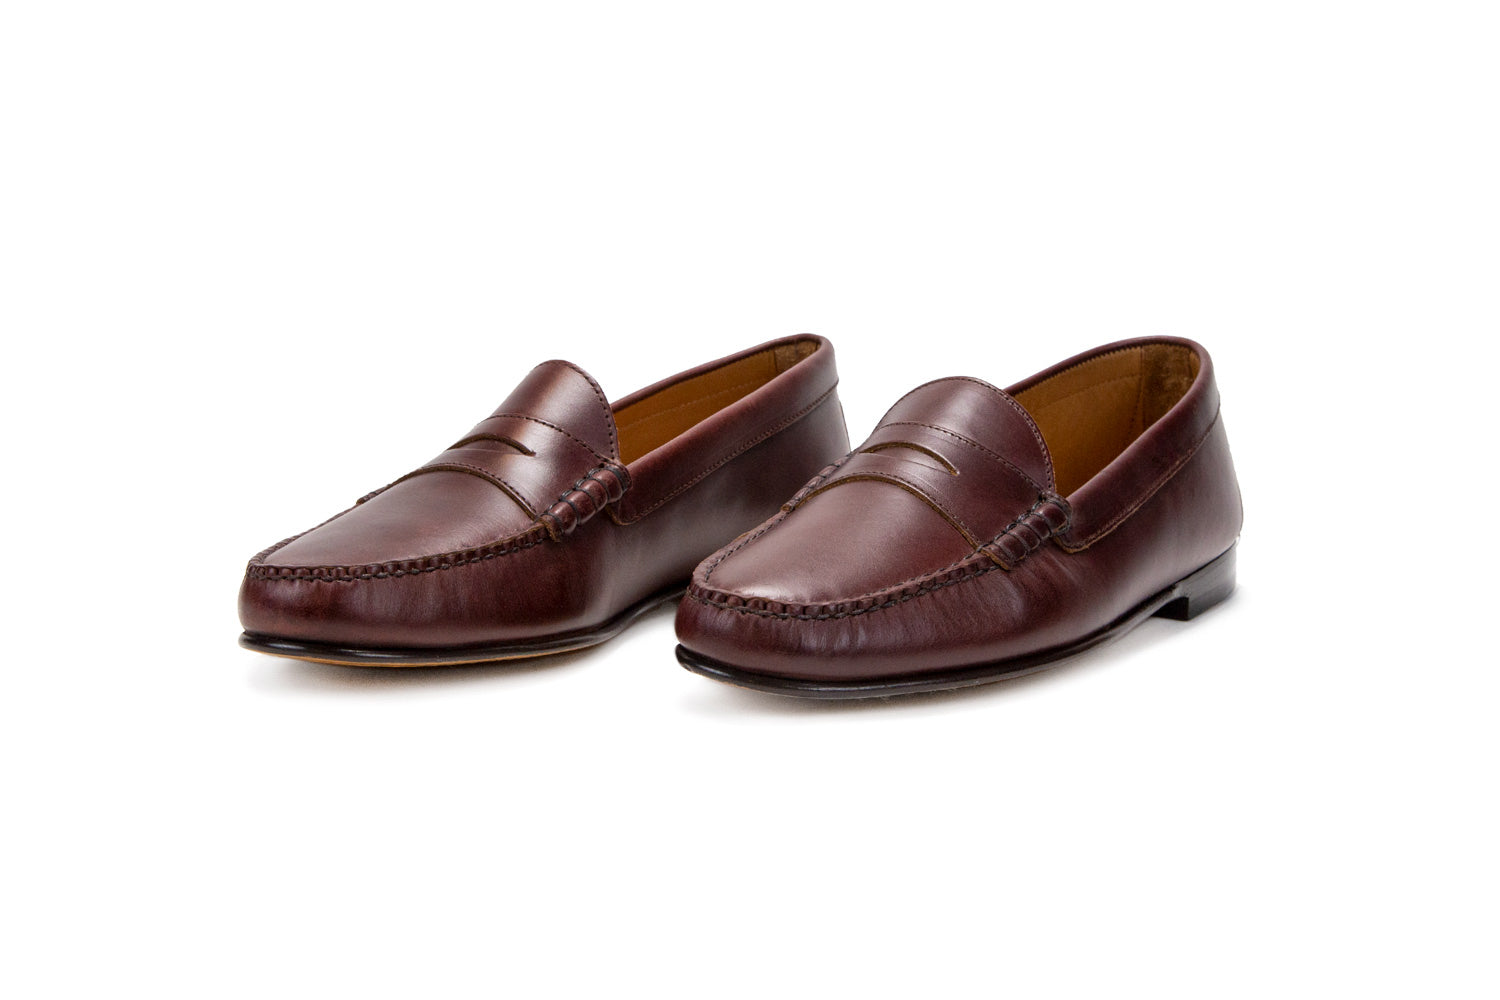 Cromwell Handsewn Full Grain Leather Penny Loafer – Jay Butler